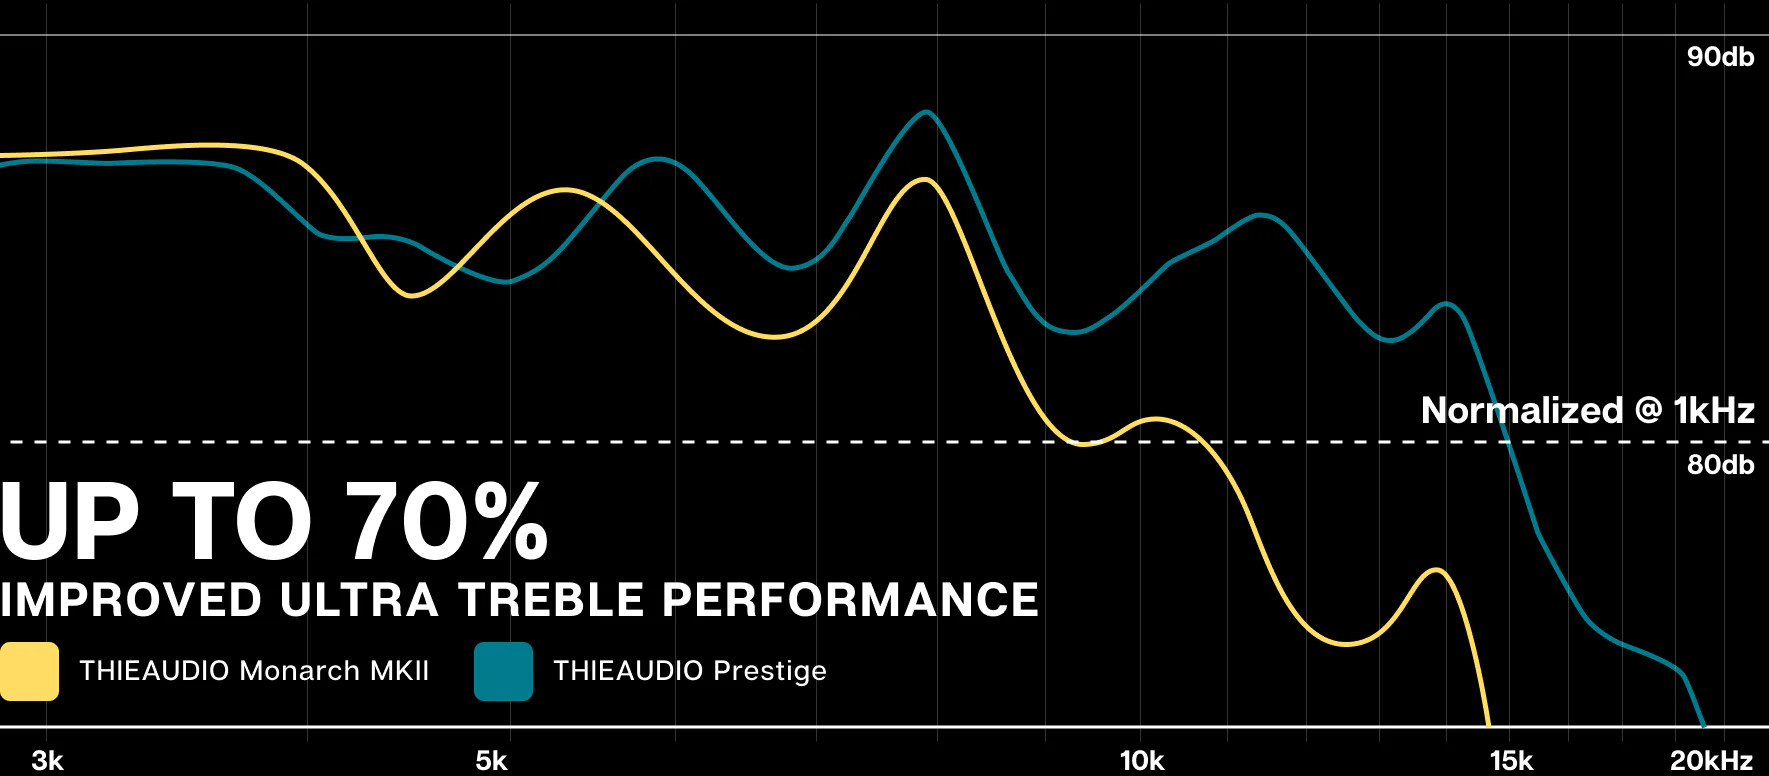 Frequency graph comparing Thieaudio Prestige to the Monarch MKII